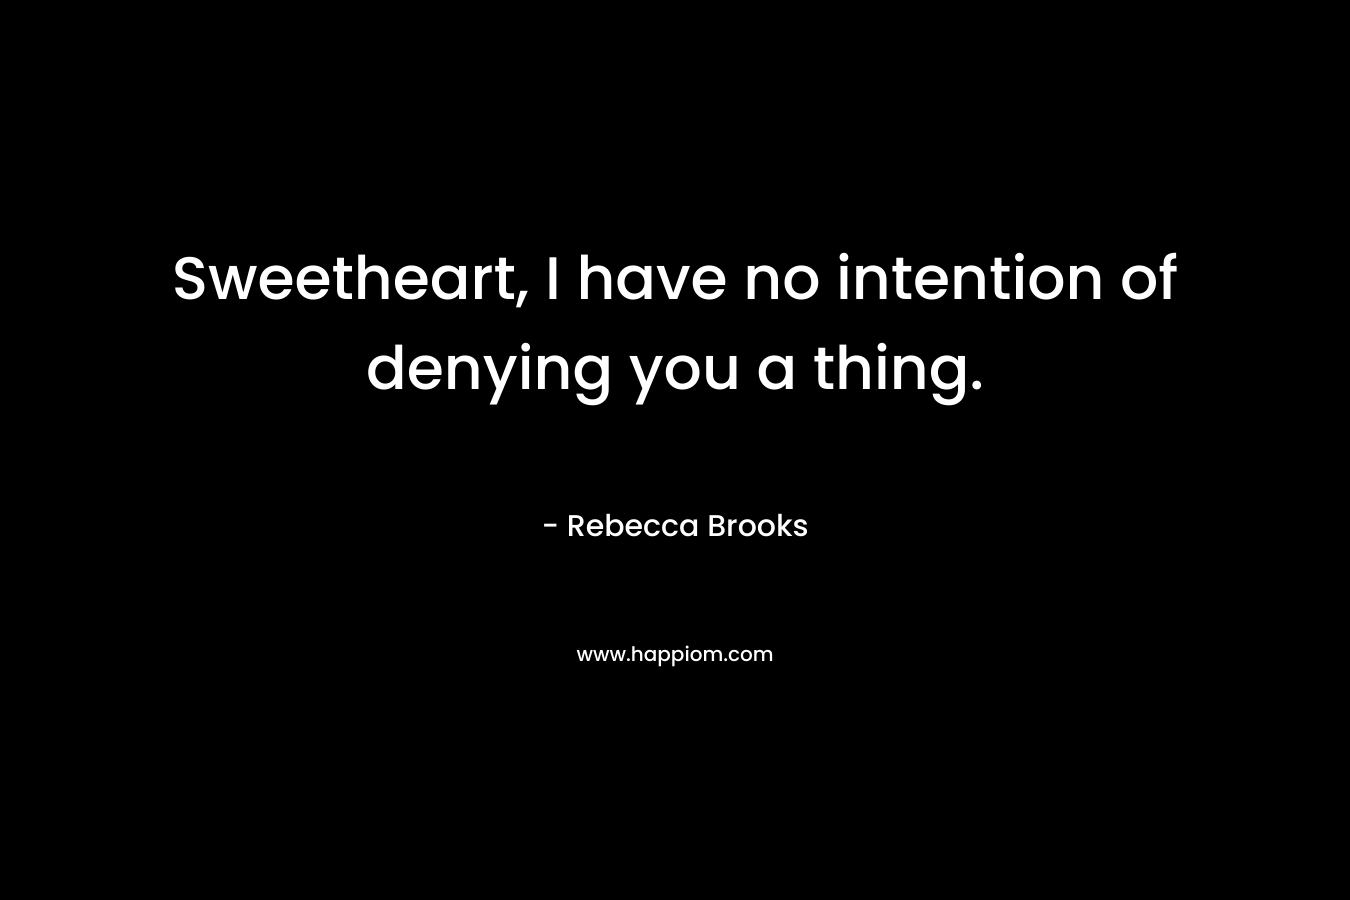 Sweetheart, I have no intention of denying you a thing. – Rebecca Brooks